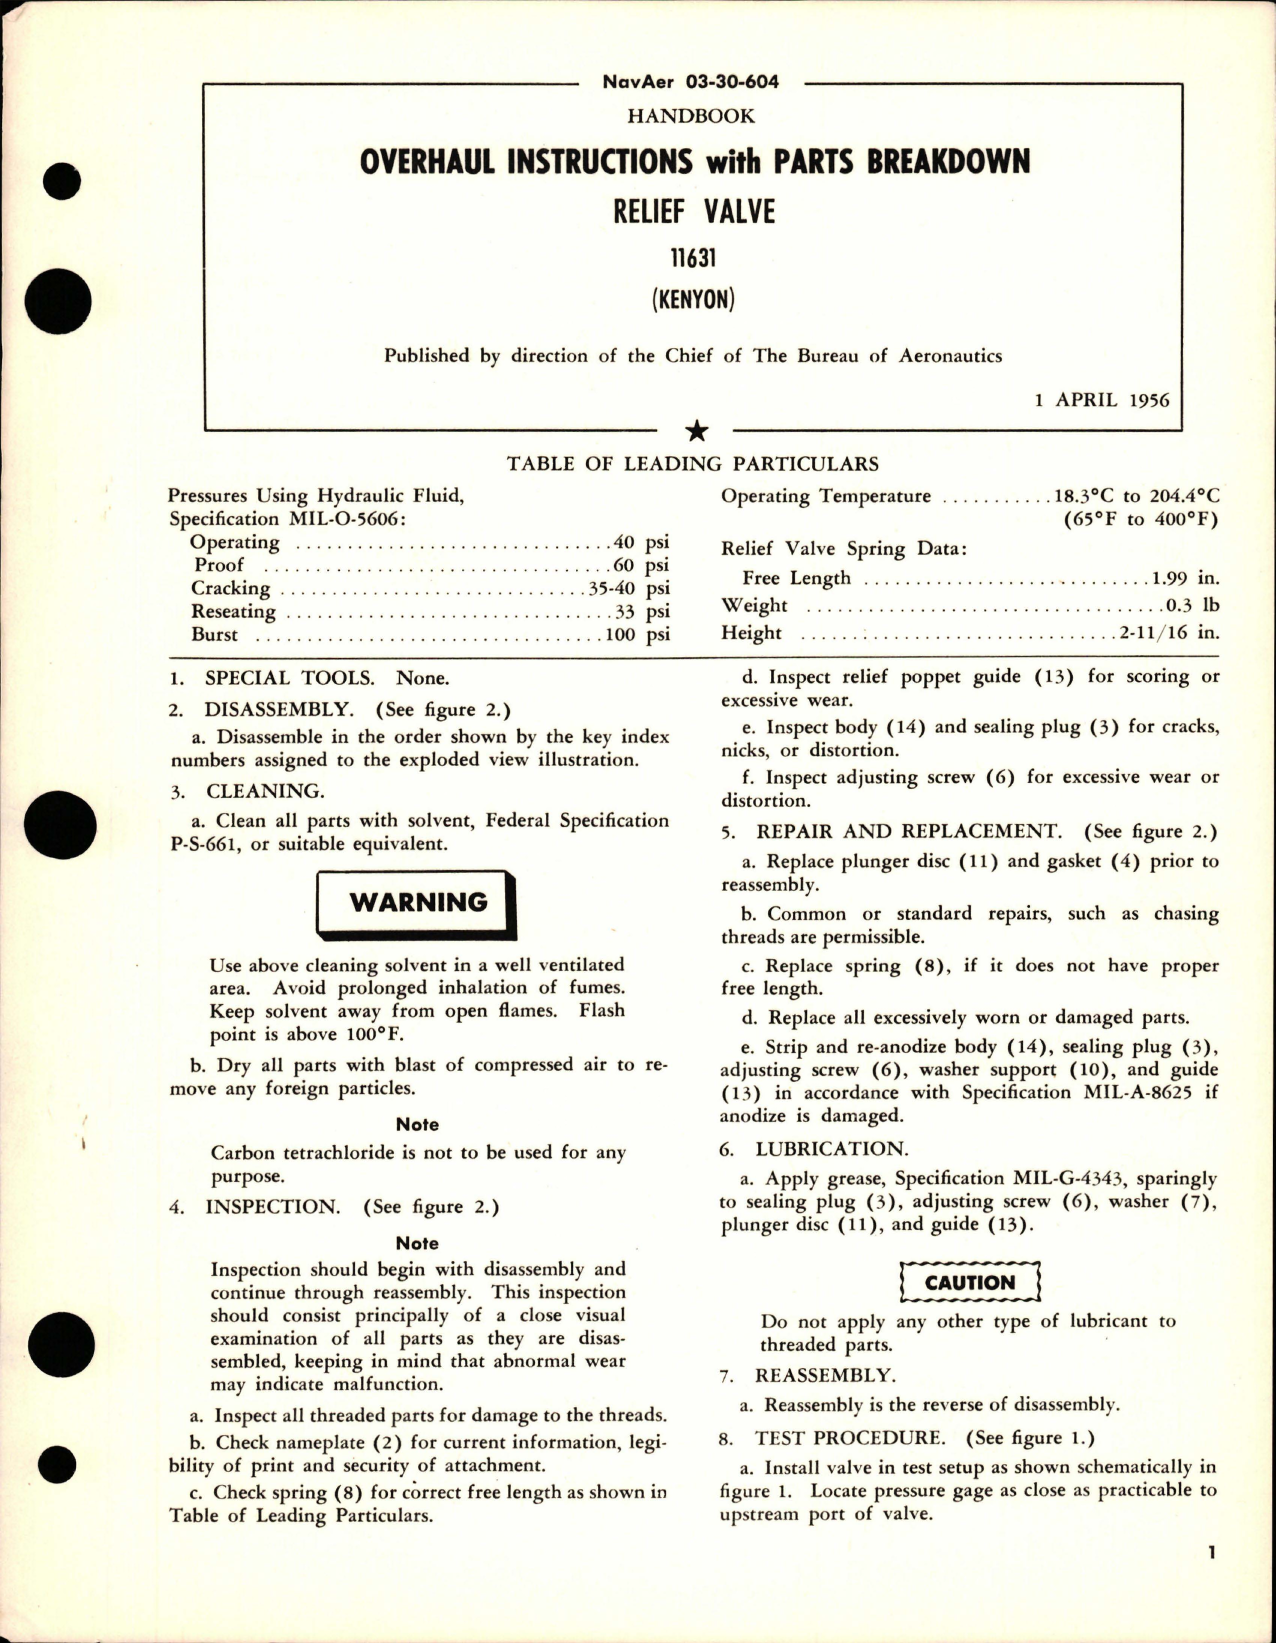 Sample page 1 from AirCorps Library document: Overhaul Instructions with Parts Breakdown for Relief Valve - 11631